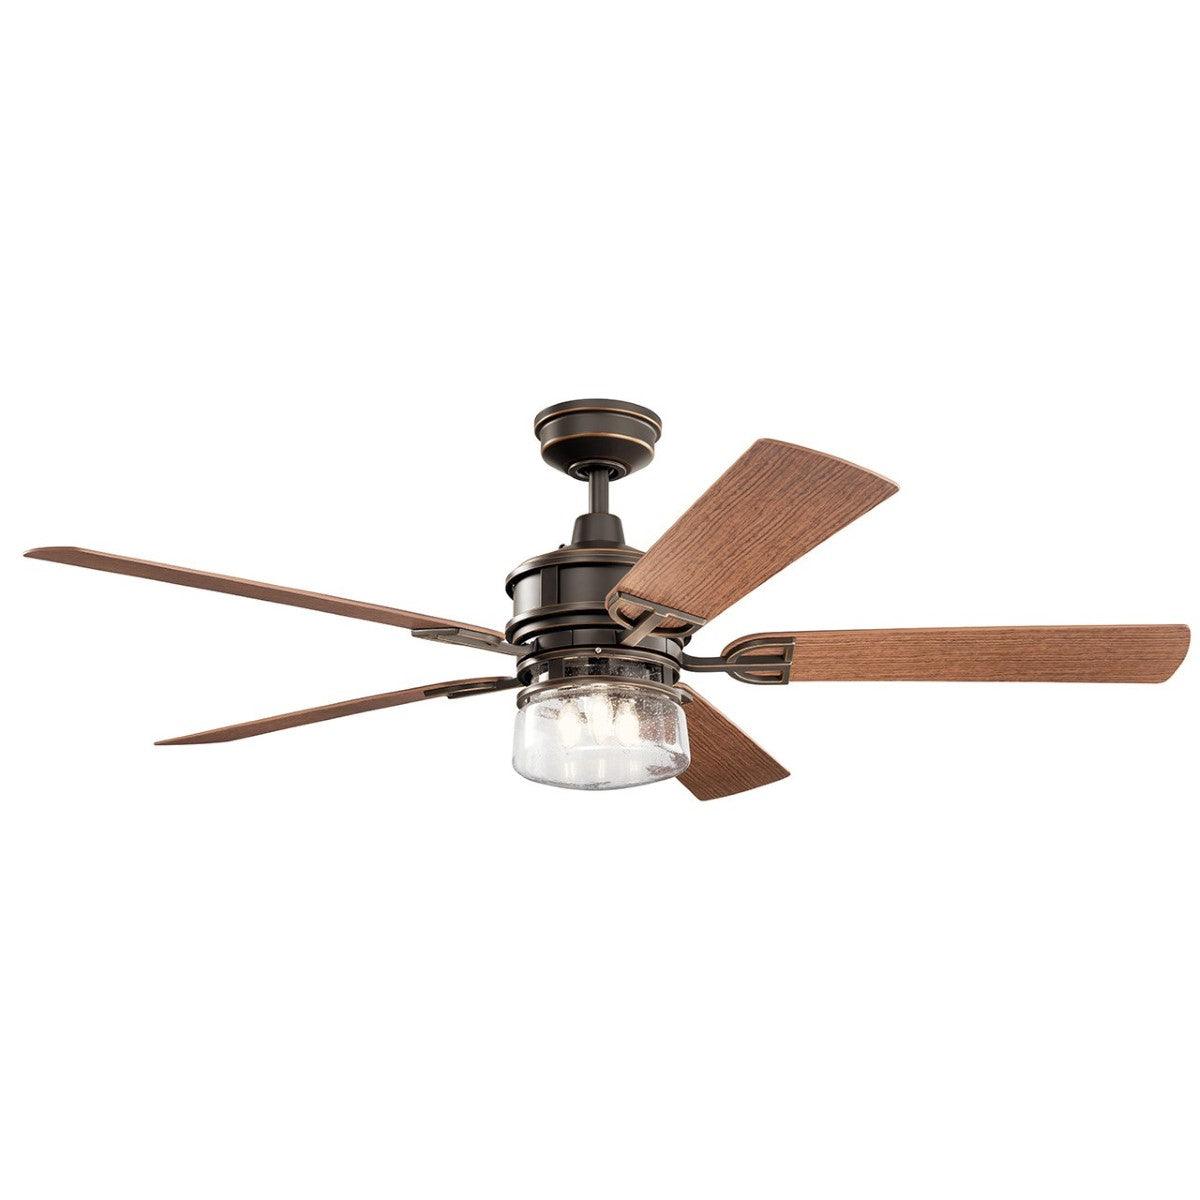 Lyndon 60 Inch Rustic Outdoor Ceiling Fan With Light And Wall Control